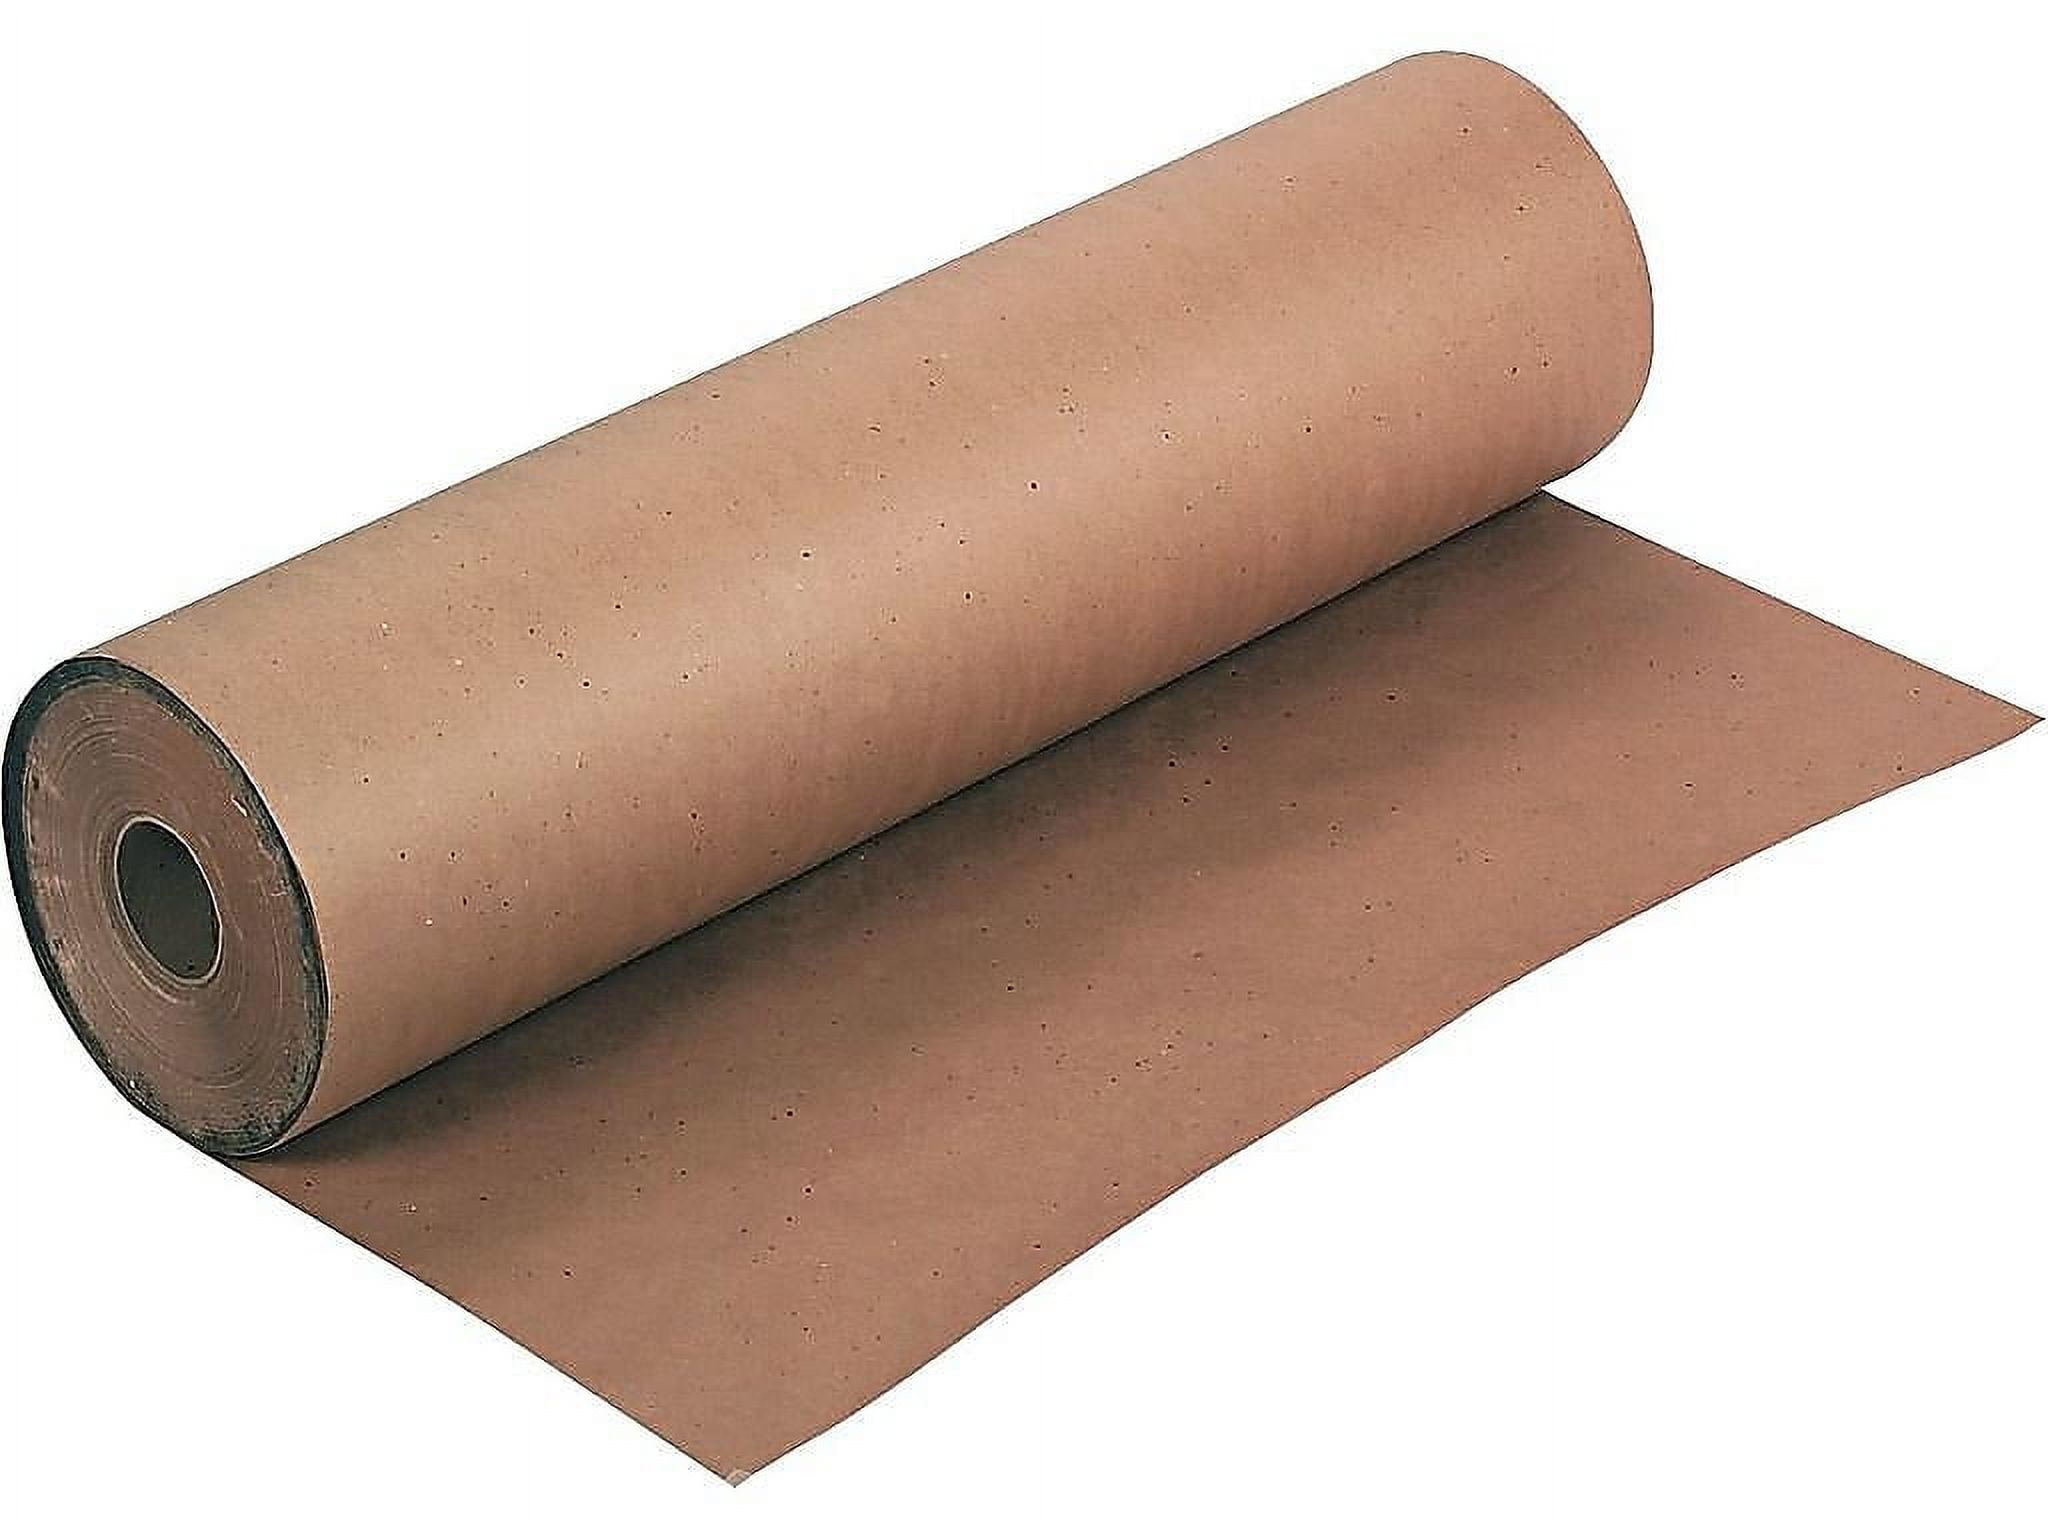 24 x 36 40#Kraft Paper Sheets (625 Sheets/Bndl) by Paper Mart, Size: 24'' x 36'' | Quantity of: 1